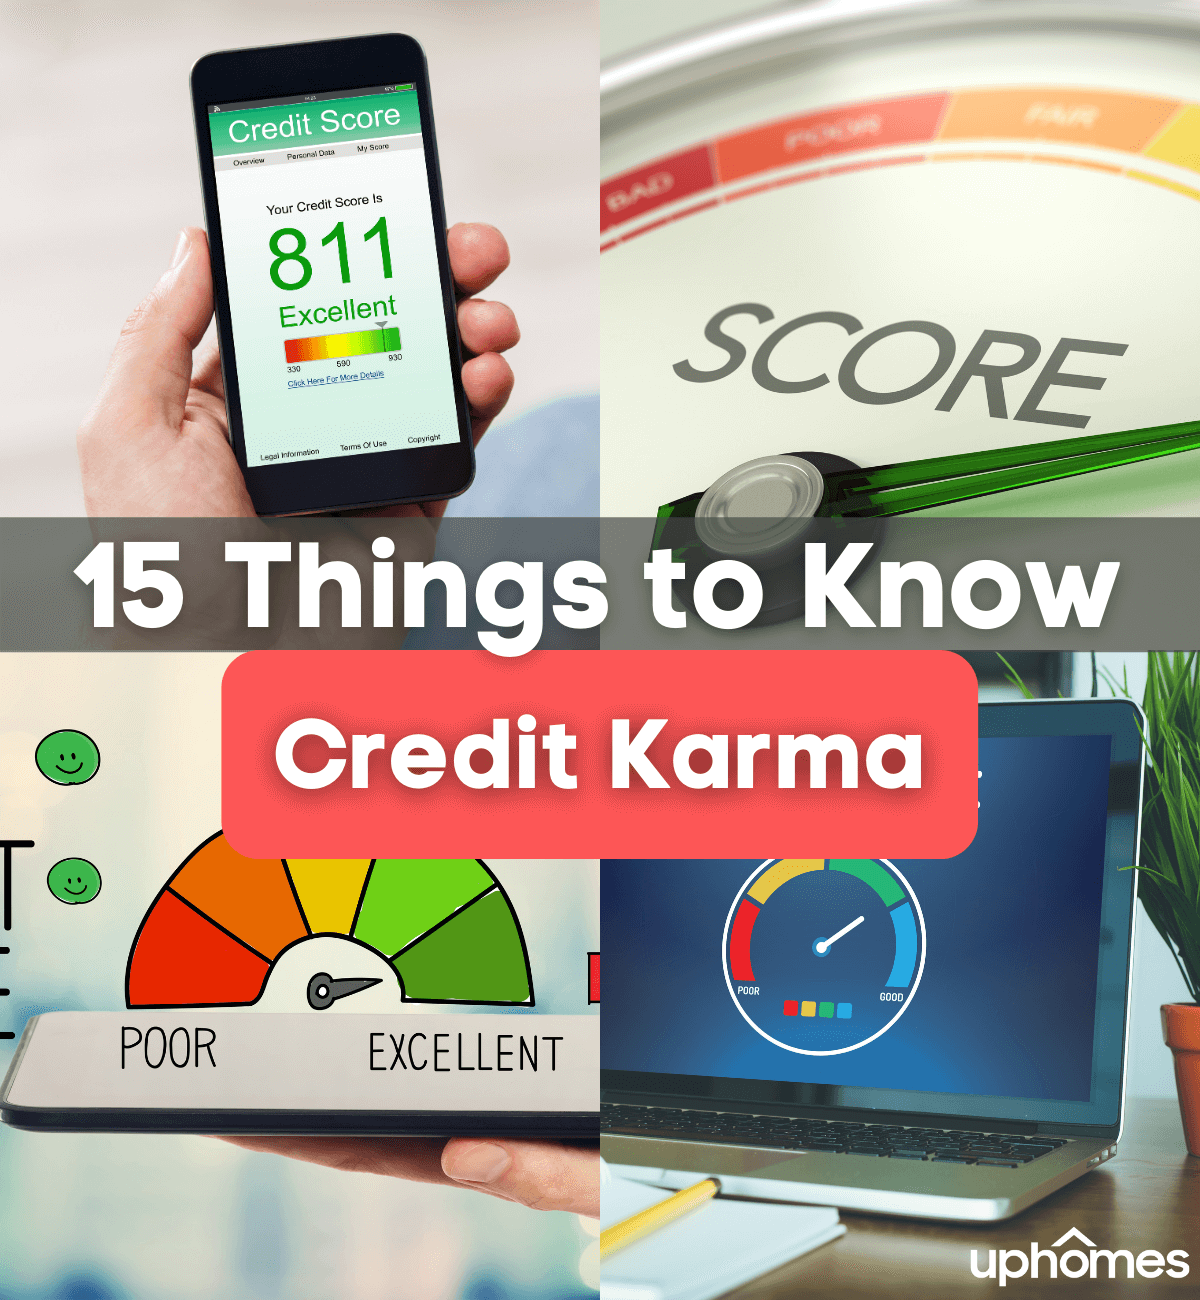 Credit Karma - 15 Things BEFORE You Sign Up for Credit Karma